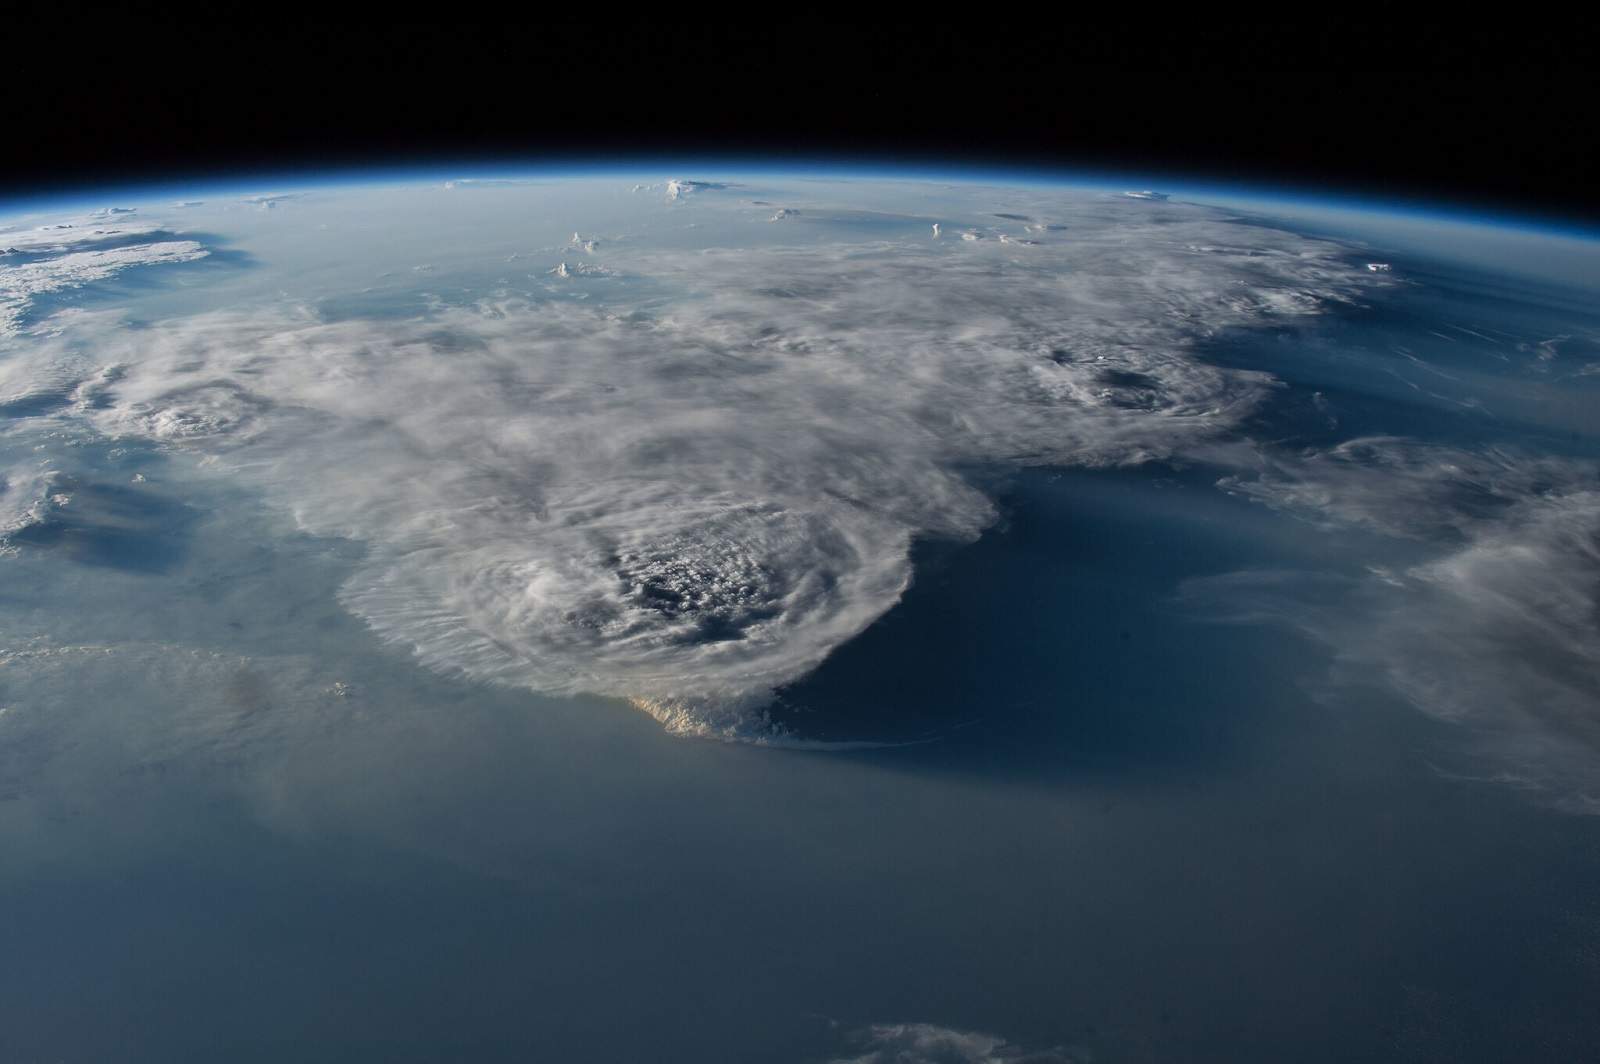 Thunderstorm over the South China Sea viewed from the International Space Station (NASA Johnson/Flickr)